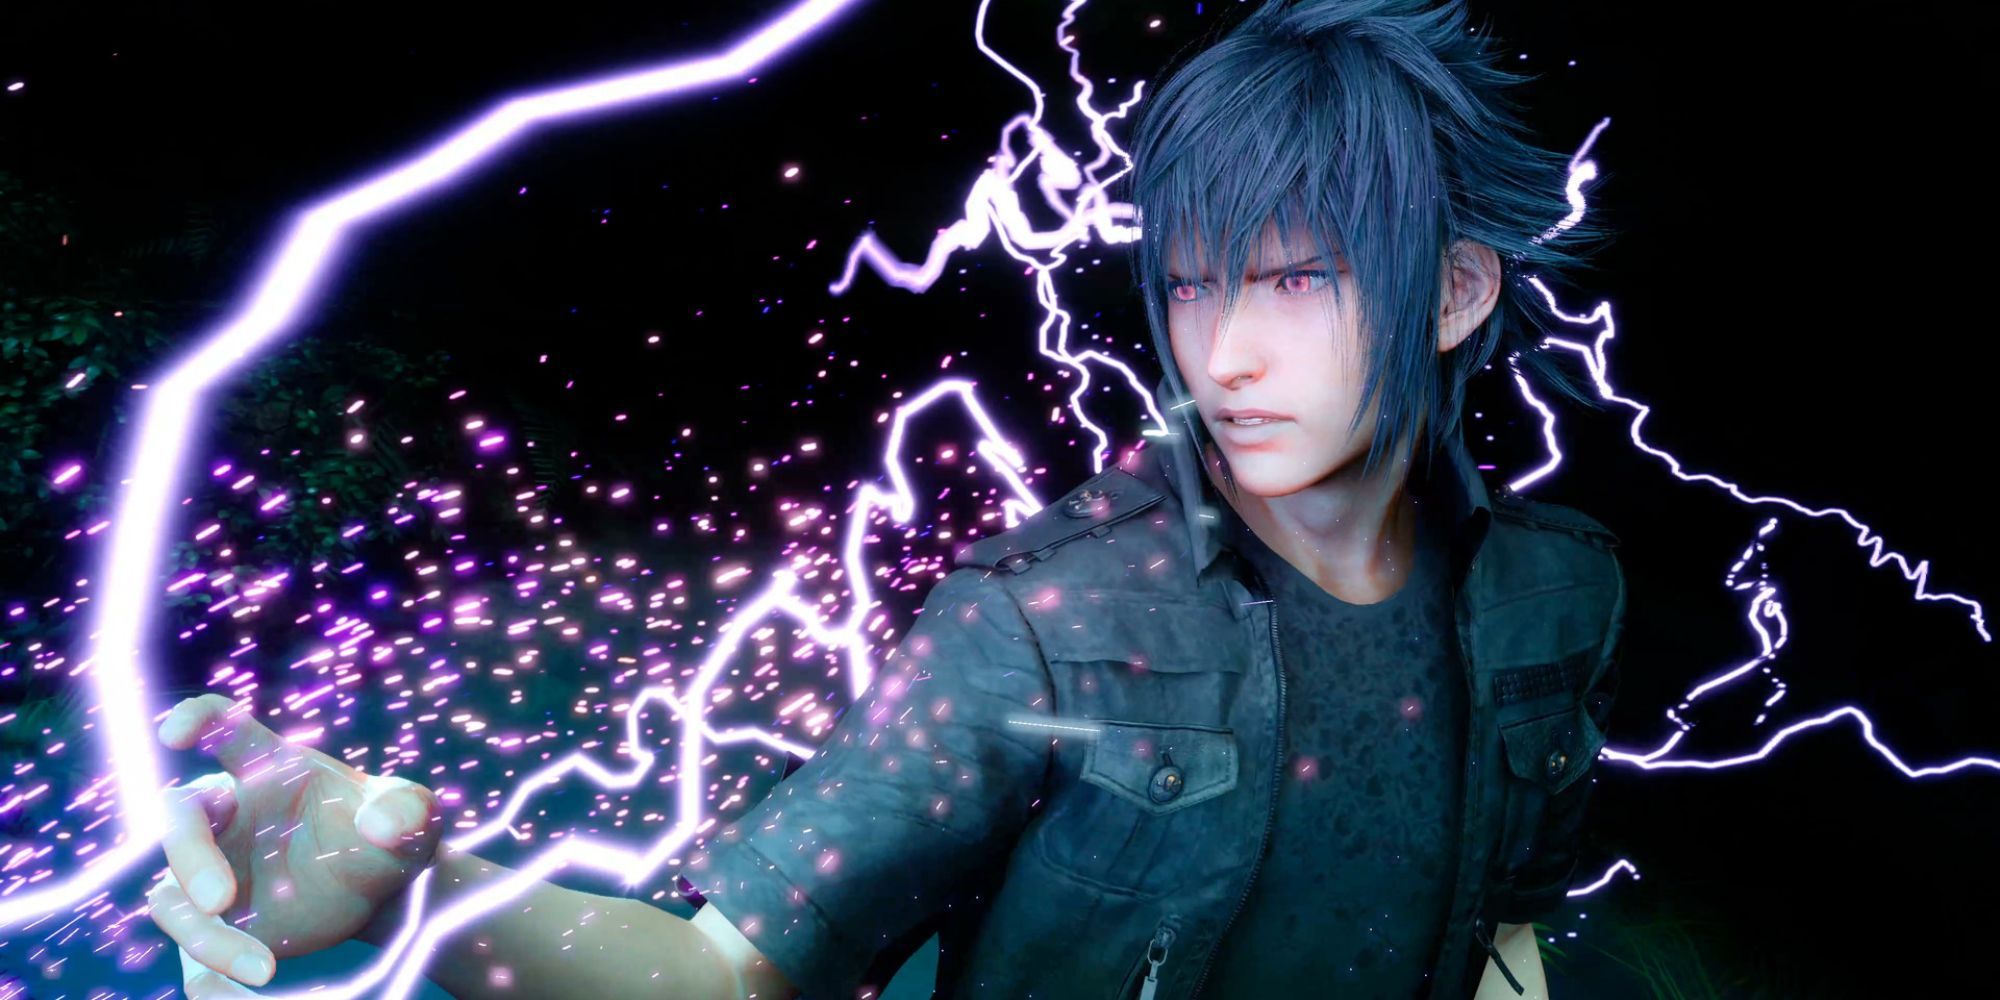 Final Fantasy 15 - Noctis channels lightning while his eyes glow red